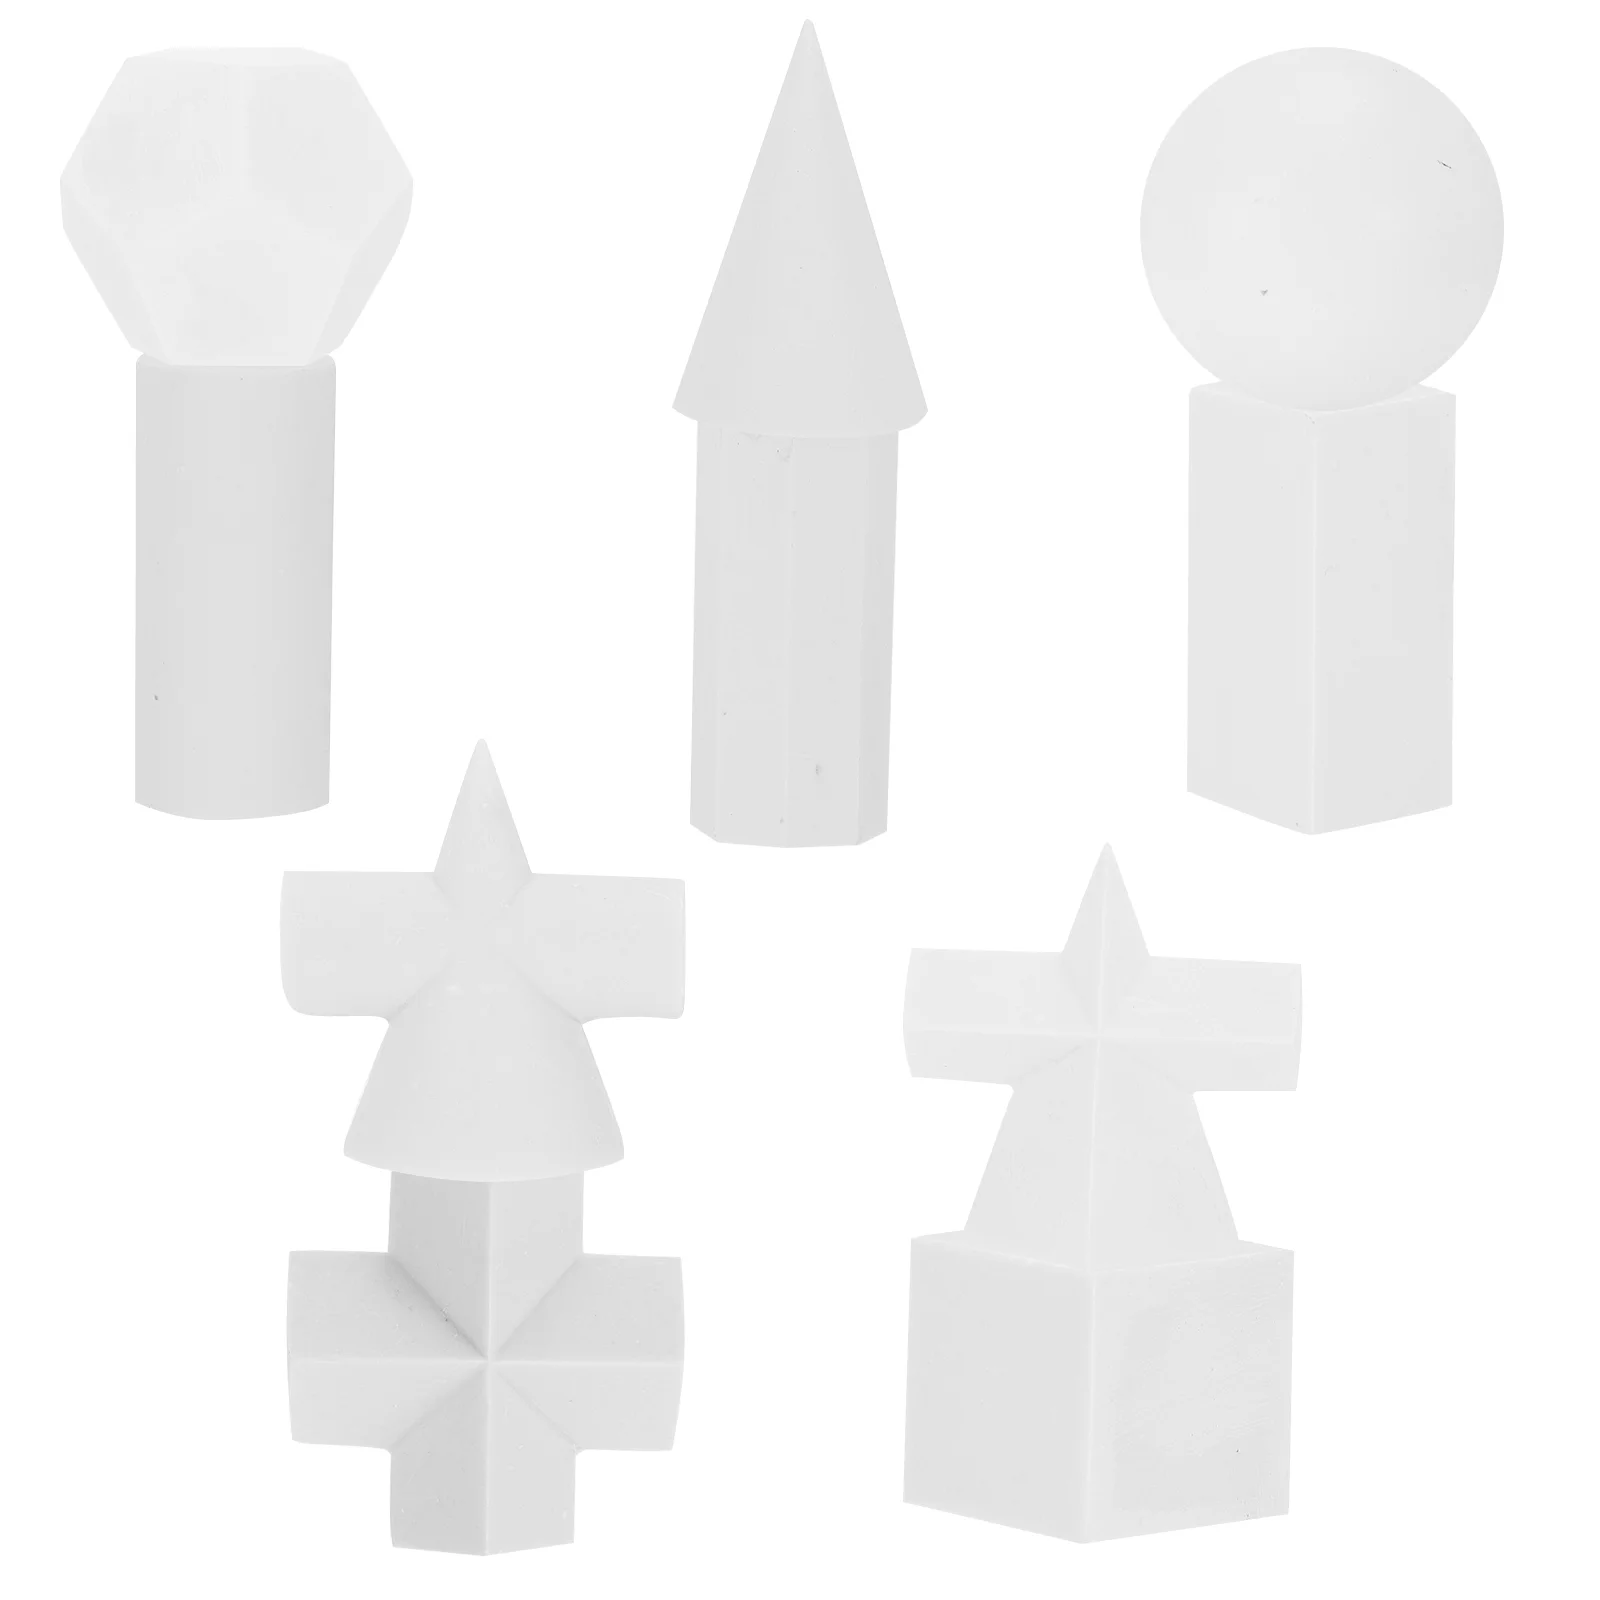 

10 Pcs Sketch Geometry Drawing Sculpture Model Statue Decor Practice Figurine Geometrical Resin Office Moulds Tools